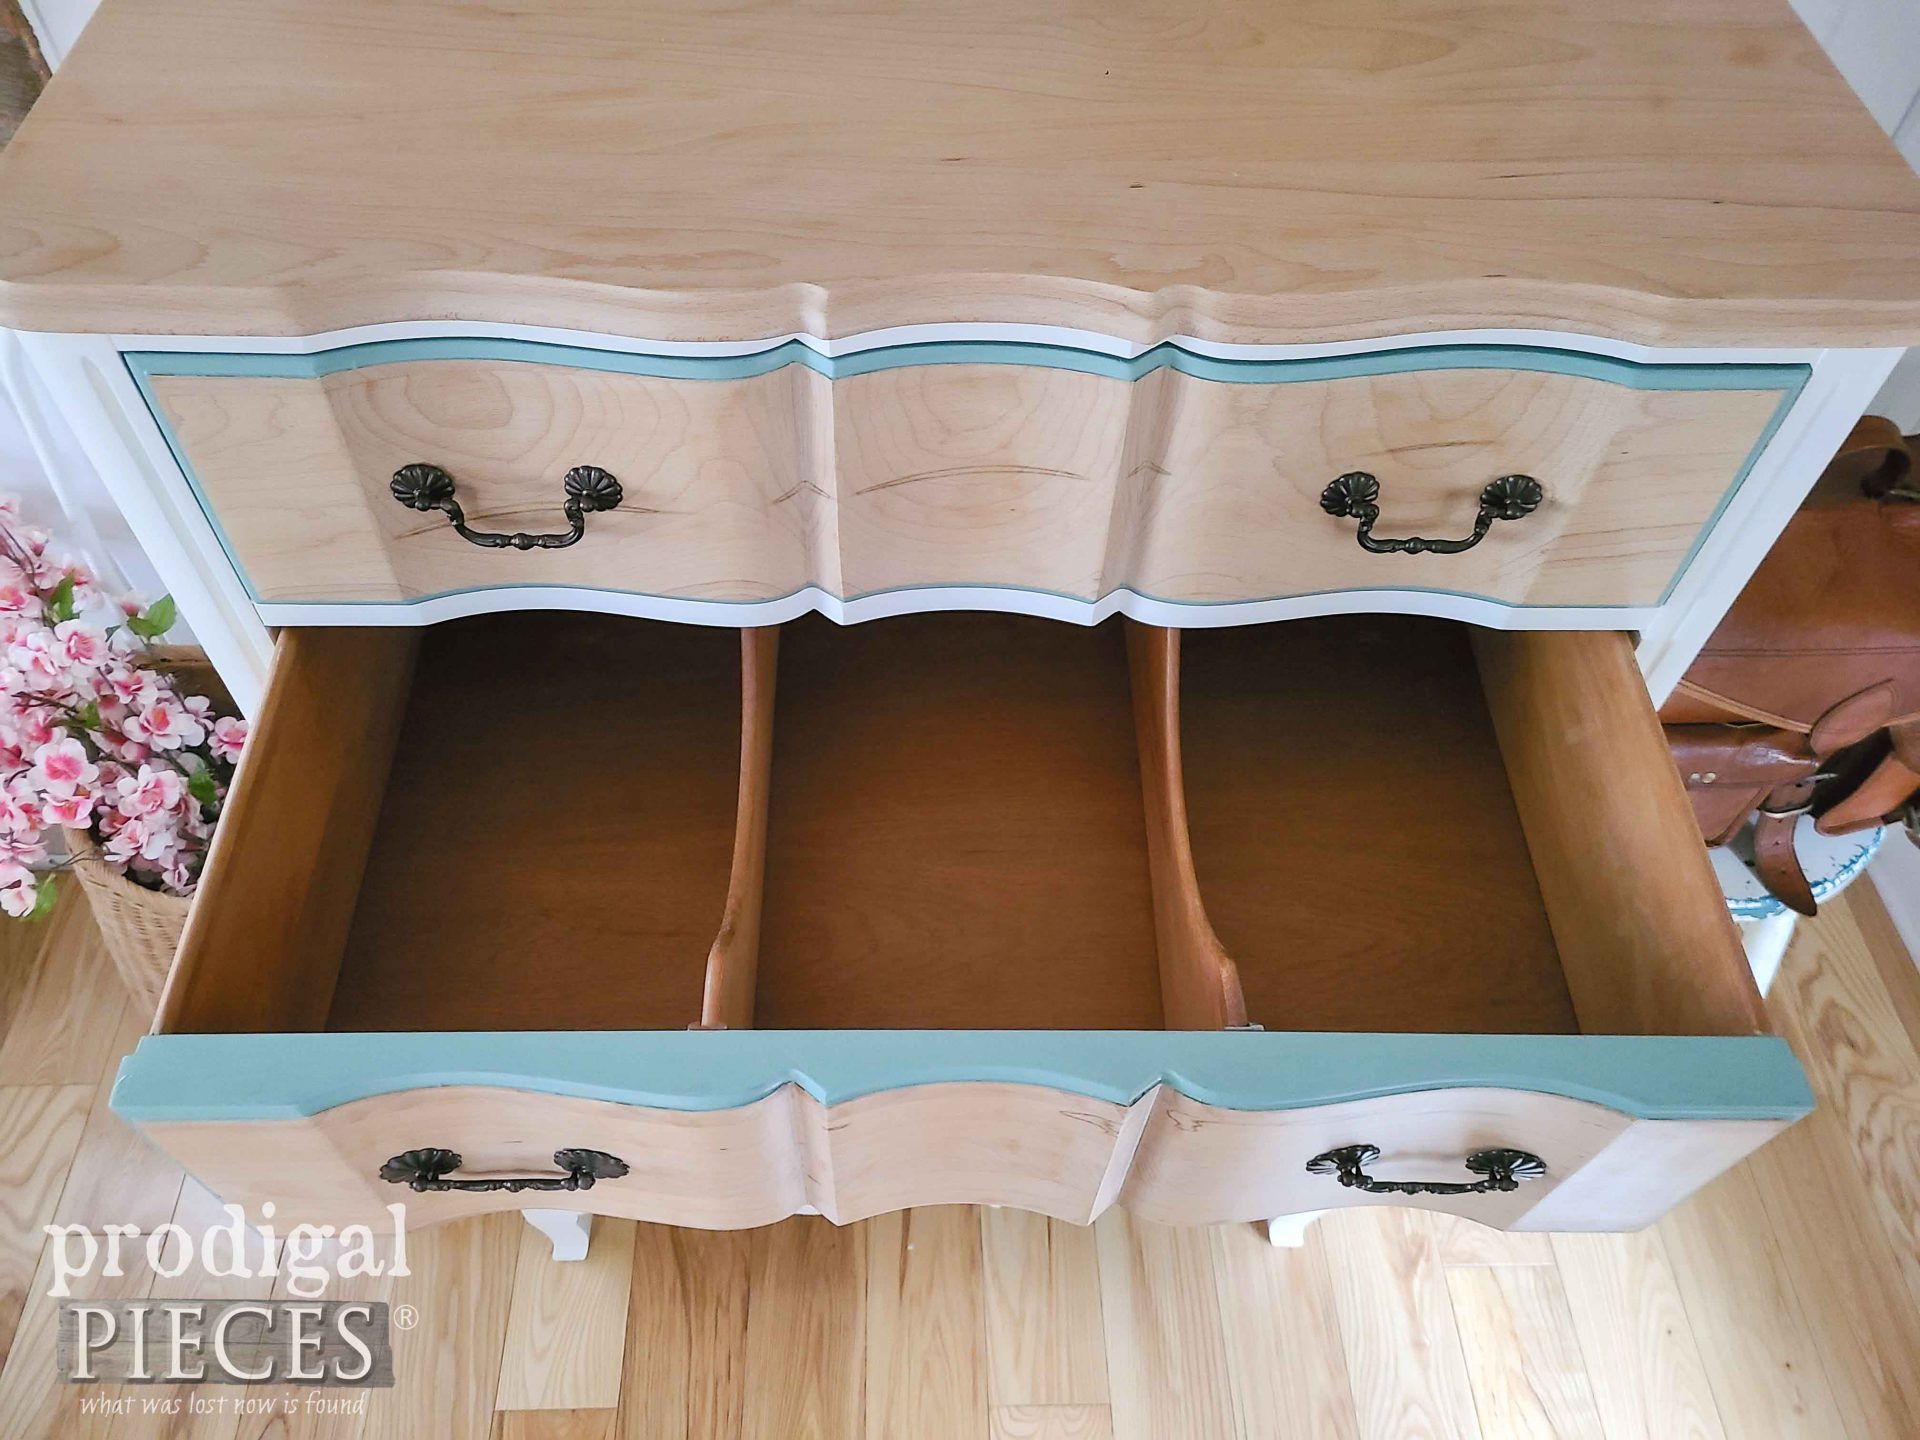 Shirt Drawer Dividers in Vintage Chest of Drawers | prodigalpieces.com #prodigalpieces